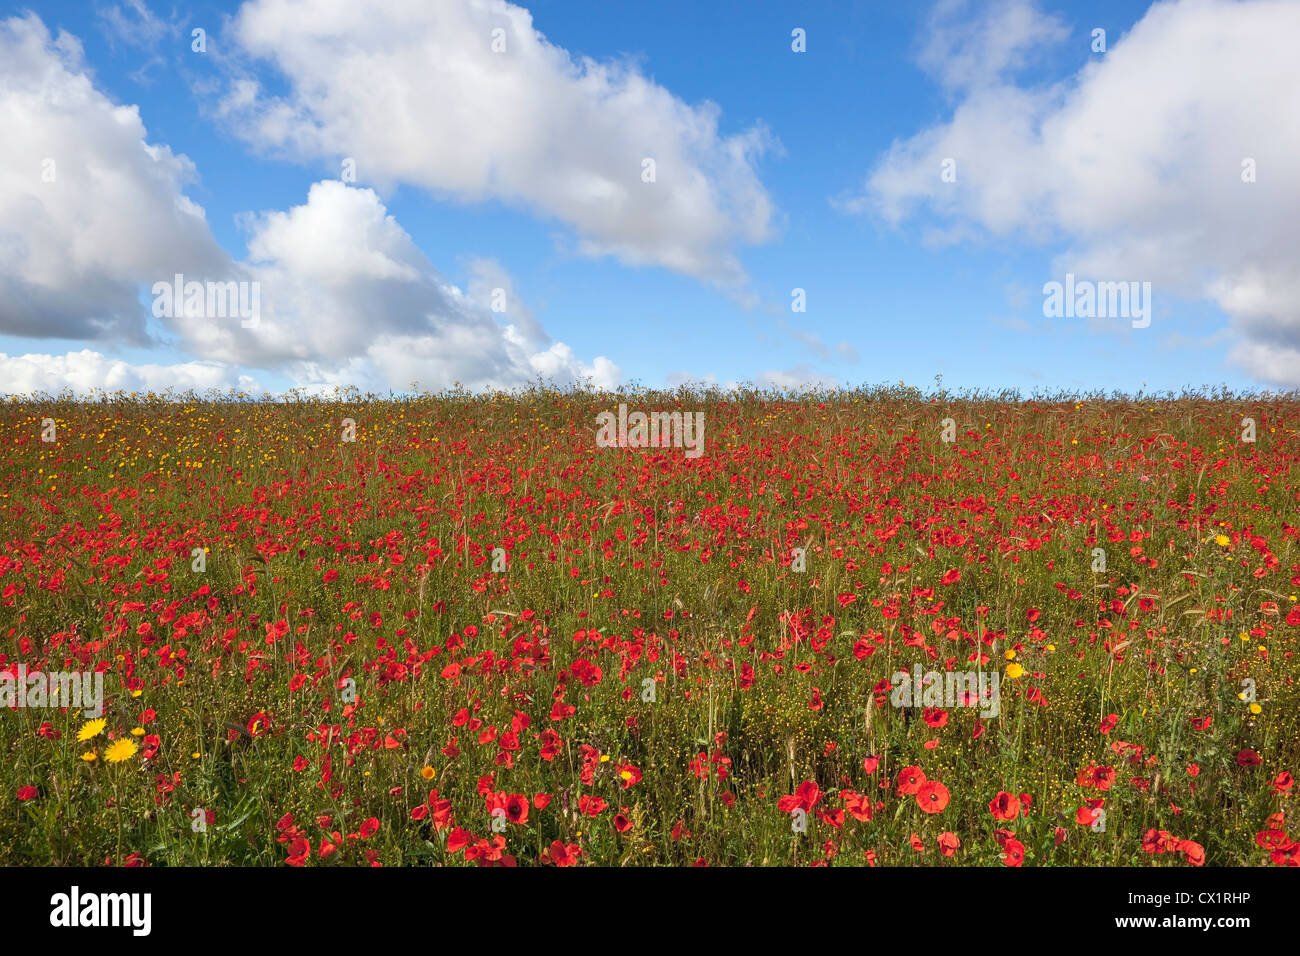 background image of wildflowers on a hillside with bright red poppies and Hawksbeard under a blue cloudy sky in summer Stock Photo